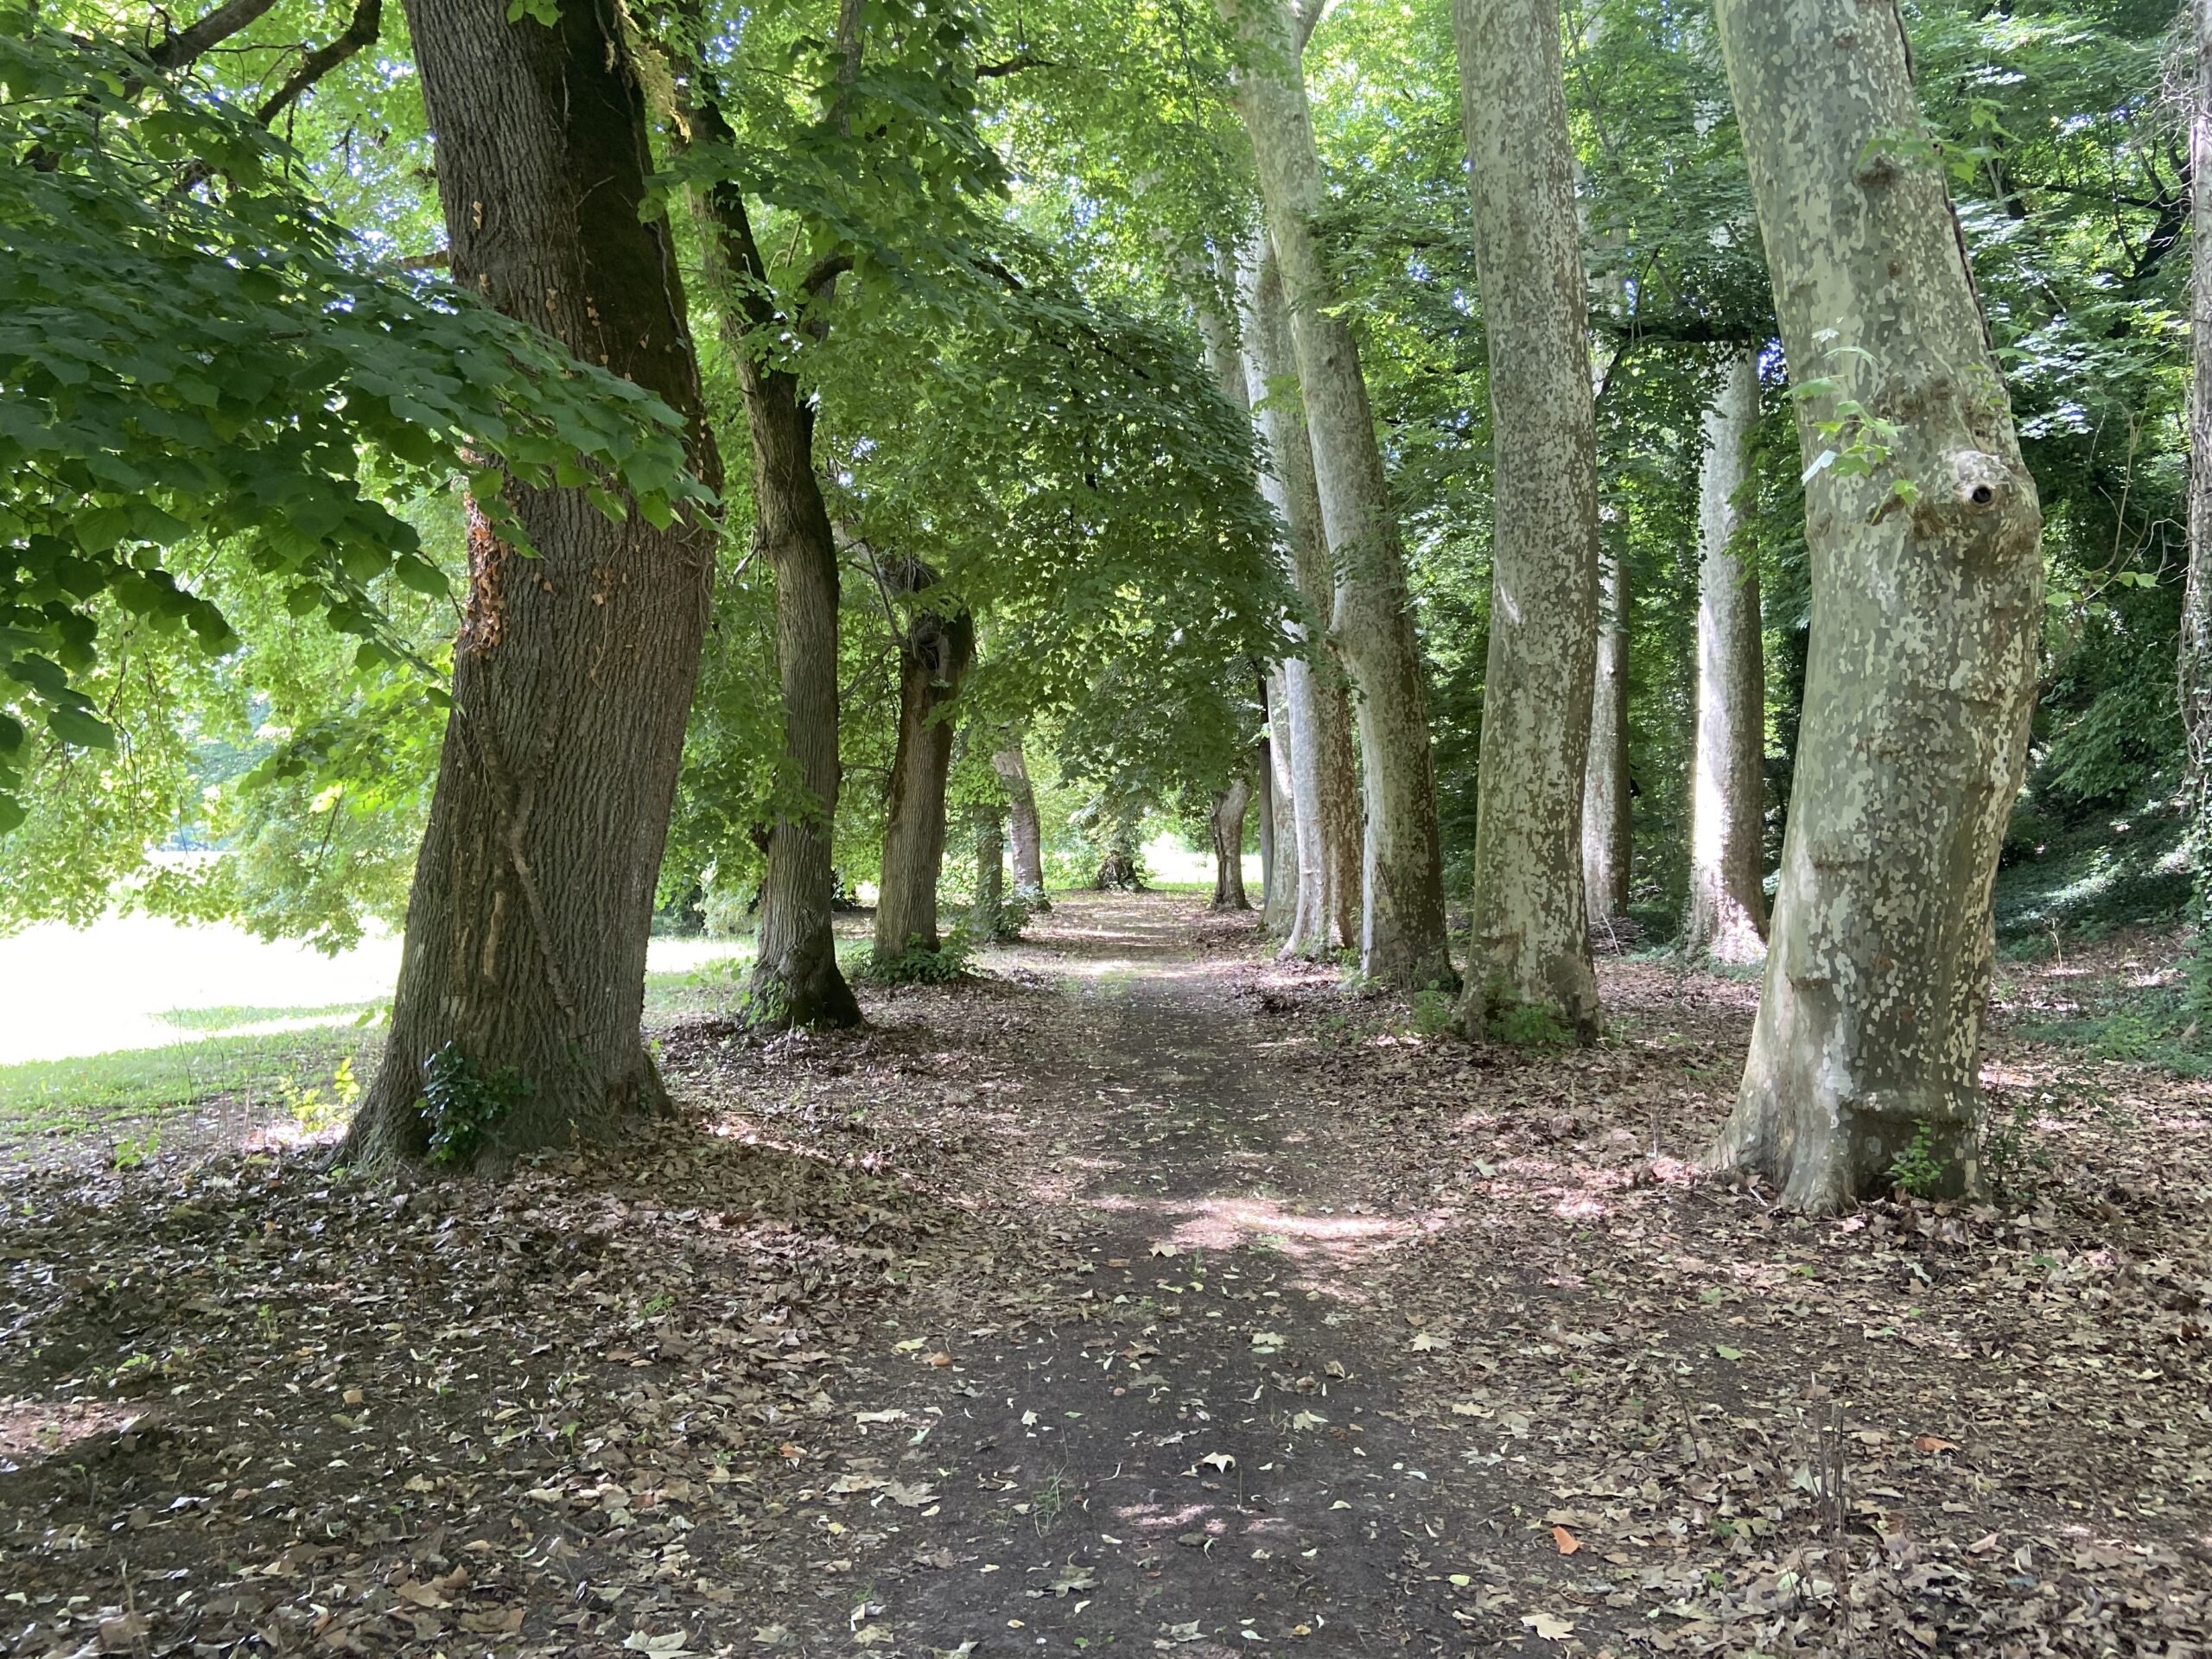 aisle with big trees on the edges